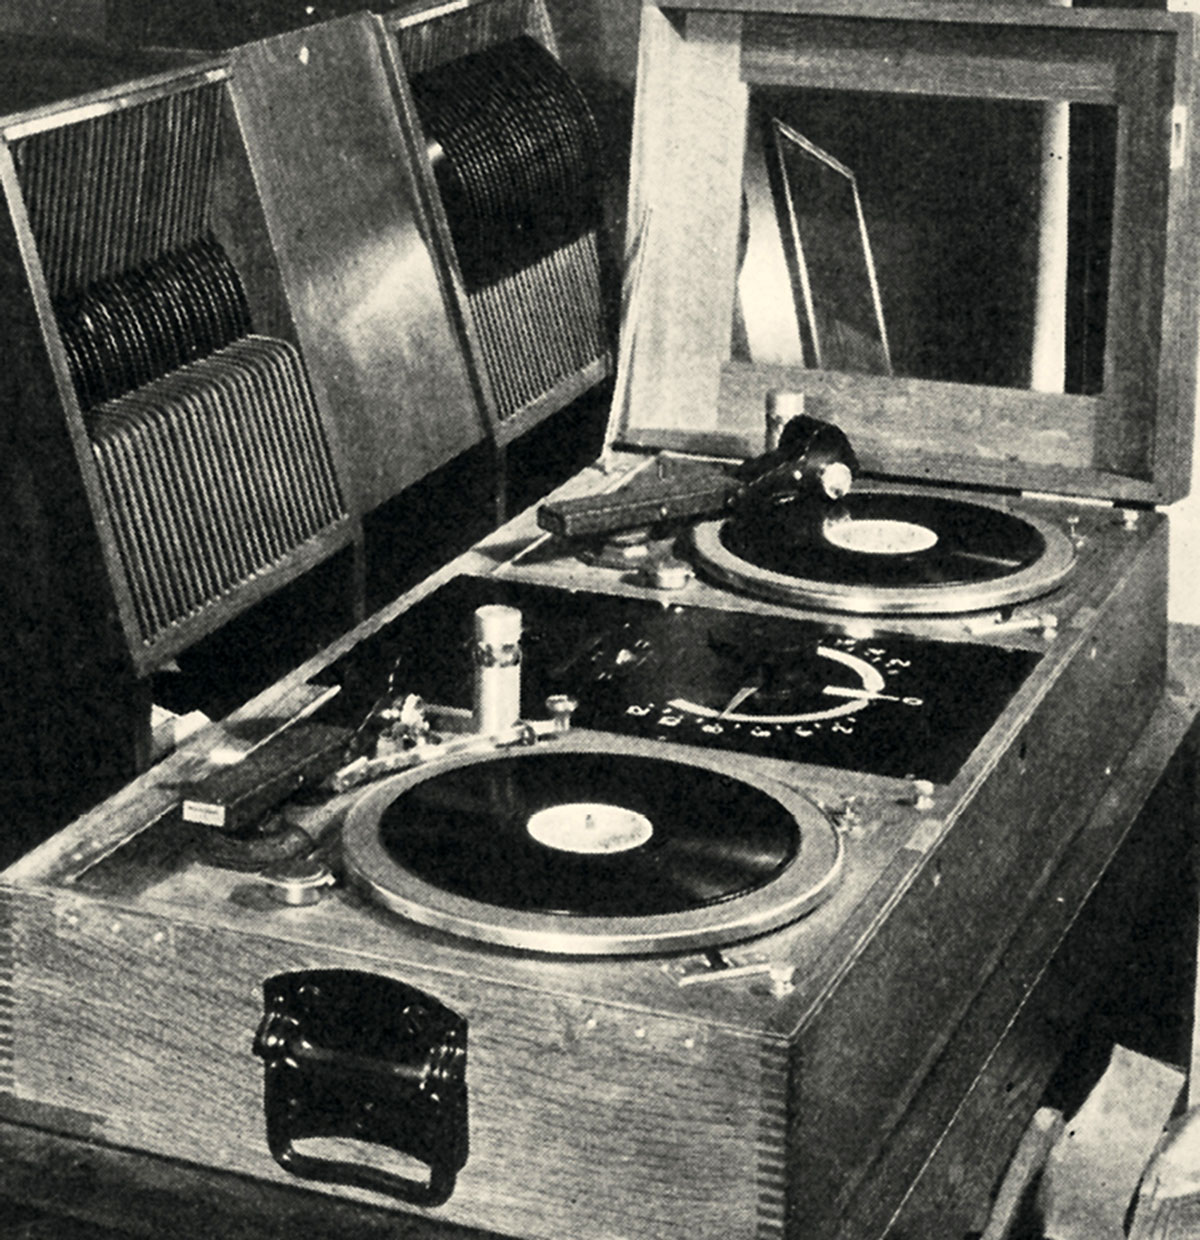 A circa 1929 photograph of a Western Electric non-sync turntable unit in a wooden desk cabinet. 